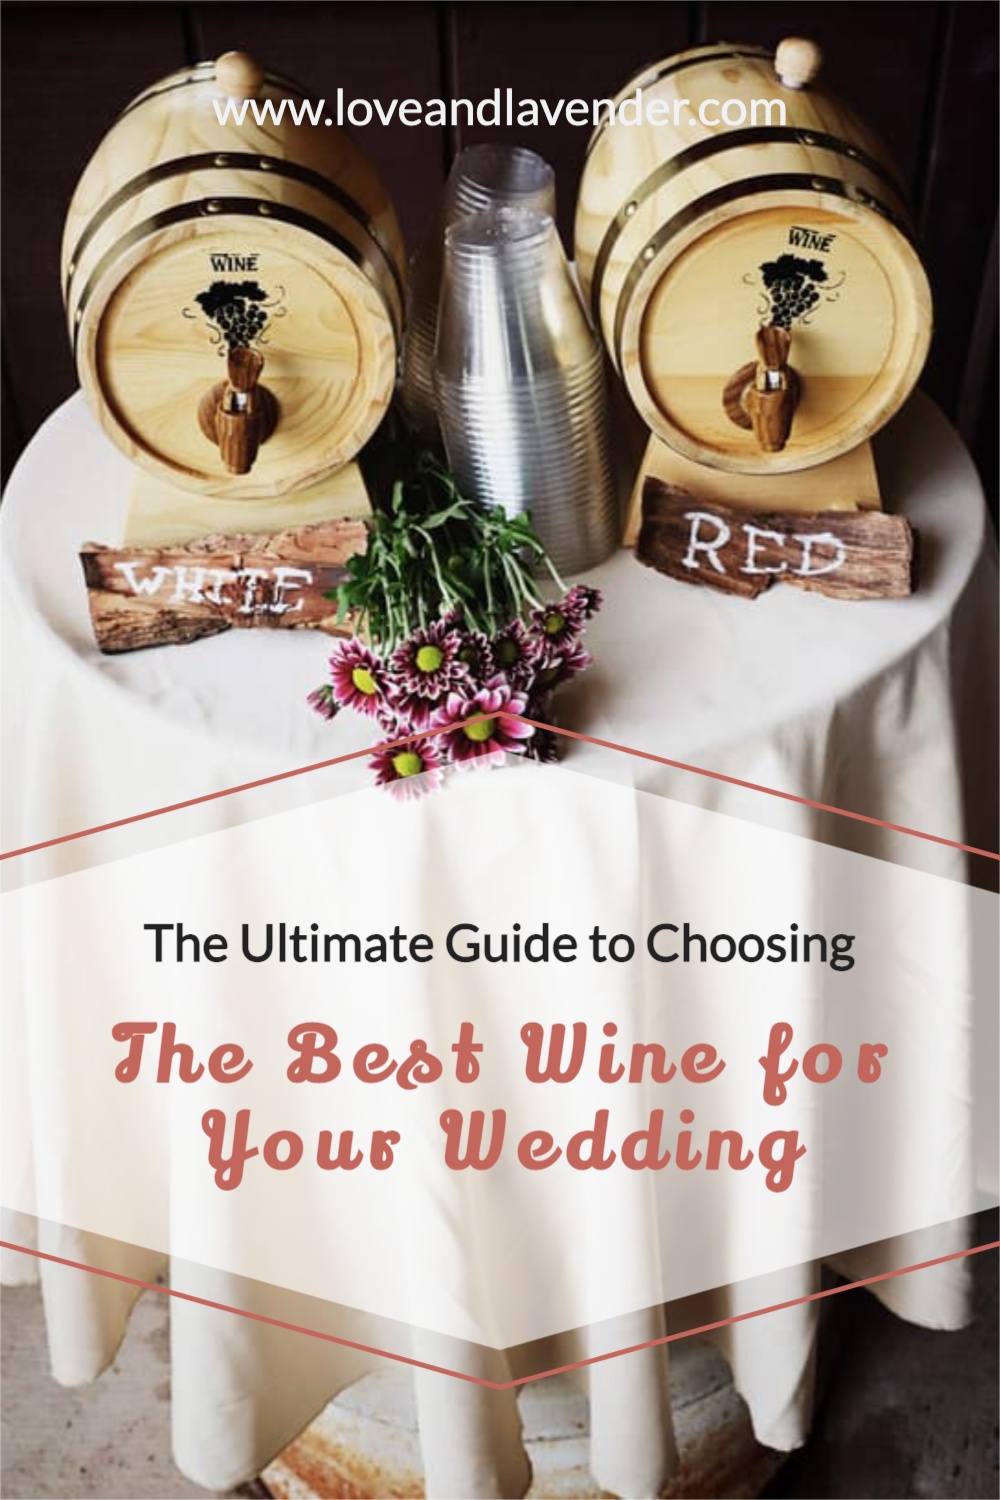 The Ultimate Guide to Choosing the Best Wine for Your Wedding